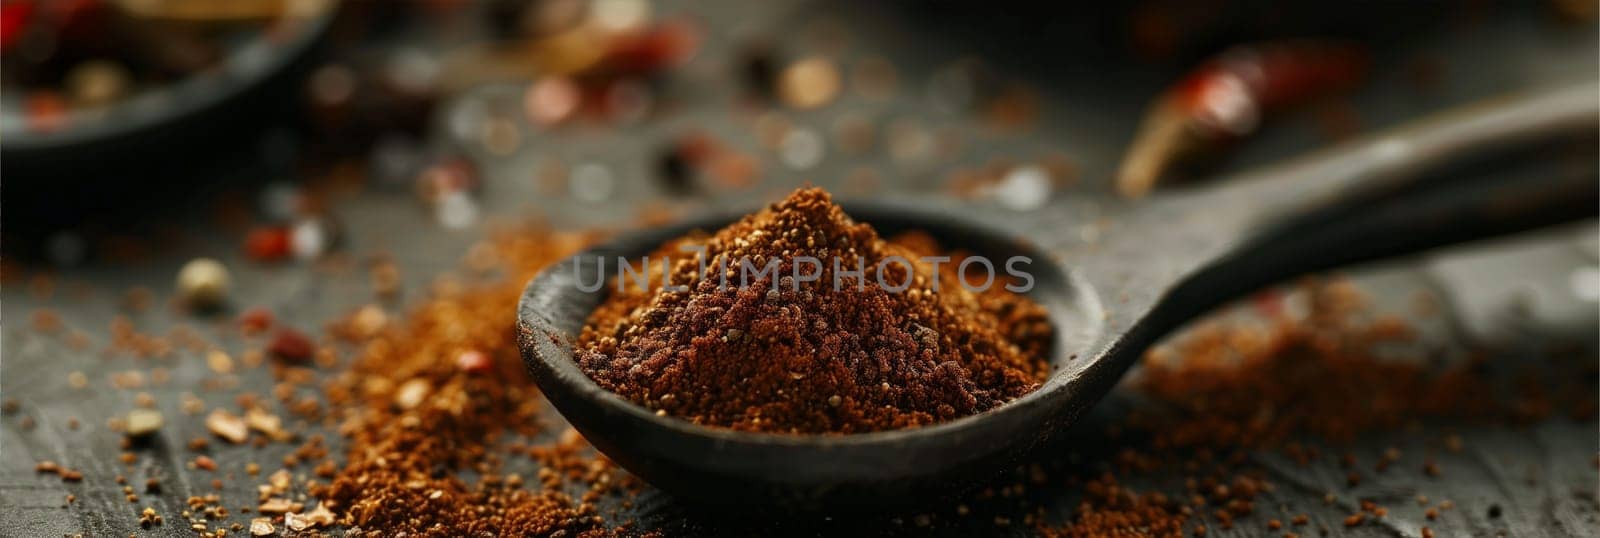 A stainless steel spoon holds a small amount of vibrant red powder on its surface.